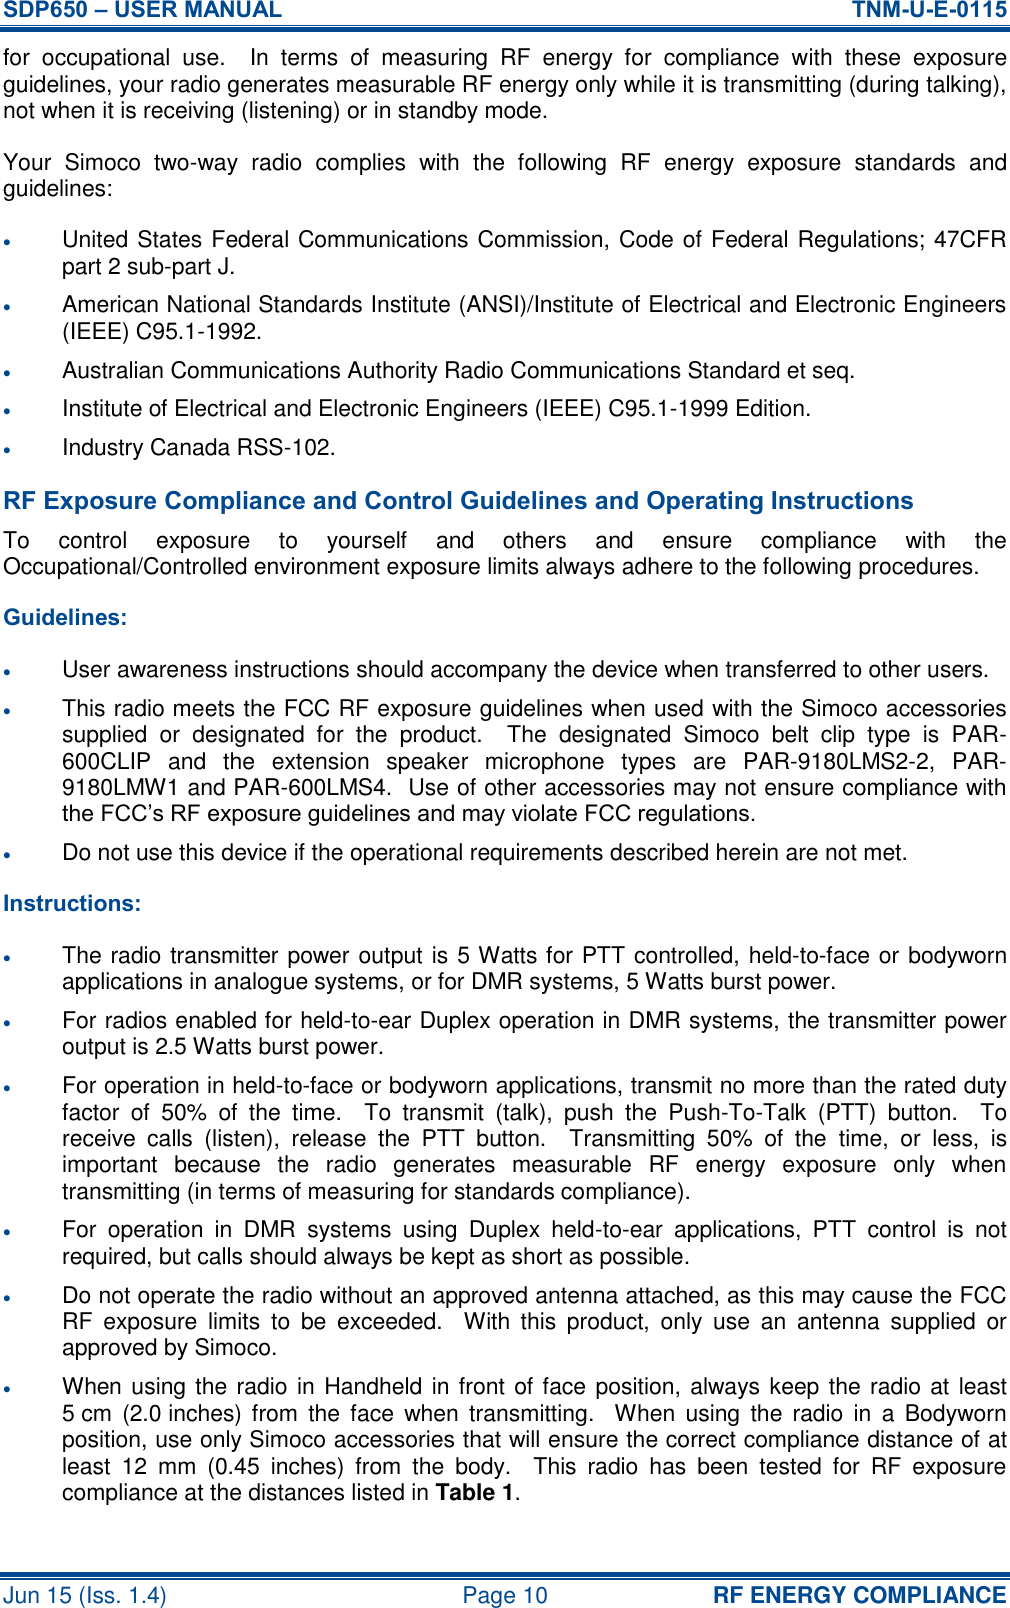 SDP650 – USER MANUAL  TNM-U-E-0115 Jun 15 (Iss. 1.4)  Page 10 RF ENERGY COMPLIANCE for  occupational  use.    In  terms  of  measuring  RF  energy  for  compliance  with  these  exposure guidelines, your radio generates measurable RF energy only while it is transmitting (during talking), not when it is receiving (listening) or in standby mode. Your  Simoco  two-way  radio  complies  with  the  following  RF  energy  exposure  standards  and guidelines:  United States Federal Communications Commission, Code of Federal Regulations; 47CFR part 2 sub-part J.  American National Standards Institute (ANSI)/Institute of Electrical and Electronic Engineers (IEEE) C95.1-1992.  Australian Communications Authority Radio Communications Standard et seq.  Institute of Electrical and Electronic Engineers (IEEE) C95.1-1999 Edition.  Industry Canada RSS-102. RF Exposure Compliance and Control Guidelines and Operating Instructions To  control  exposure  to  yourself  and  others  and  ensure  compliance  with  the Occupational/Controlled environment exposure limits always adhere to the following procedures. Guidelines:  User awareness instructions should accompany the device when transferred to other users.  This radio meets the FCC RF exposure guidelines when used with the Simoco accessories supplied  or  designated  for  the  product.    The  designated  Simoco  belt  clip  type  is  PAR-600CLIP  and  the  extension  speaker  microphone  types  are  PAR-9180LMS2-2,  PAR-9180LMW1 and PAR-600LMS4.  Use of other accessories may not ensure compliance with the FCC’s RF exposure guidelines and may violate FCC regulations.  Do not use this device if the operational requirements described herein are not met. Instructions:  The radio transmitter power output is 5 Watts for PTT controlled, held-to-face or bodyworn applications in analogue systems, or for DMR systems, 5 Watts burst power.  For radios enabled for held-to-ear Duplex operation in DMR systems, the transmitter power output is 2.5 Watts burst power.  For operation in held-to-face or bodyworn applications, transmit no more than the rated duty factor  of  50%  of  the  time.    To  transmit  (talk),  push  the  Push-To-Talk  (PTT)  button.    To receive  calls  (listen),  release  the  PTT  button.    Transmitting  50%  of  the  time,  or  less,  is important  because  the  radio  generates  measurable  RF  energy  exposure  only  when transmitting (in terms of measuring for standards compliance).  For  operation  in  DMR  systems  using  Duplex  held-to-ear  applications,  PTT  control  is  not required, but calls should always be kept as short as possible.  Do not operate the radio without an approved antenna attached, as this may cause the FCC RF  exposure  limits  to  be  exceeded.    With  this  product,  only  use  an  antenna  supplied  or approved by Simoco.  When using the radio in Handheld in front of face position, always keep the radio at least 5 cm  (2.0 inches) from  the  face  when  transmitting.    When  using  the  radio  in  a  Bodyworn position, use only Simoco accessories that will ensure the correct compliance distance of at least  12  mm  (0.45  inches)  from  the  body.    This  radio  has  been  tested  for  RF  exposure compliance at the distances listed in Table 1. 